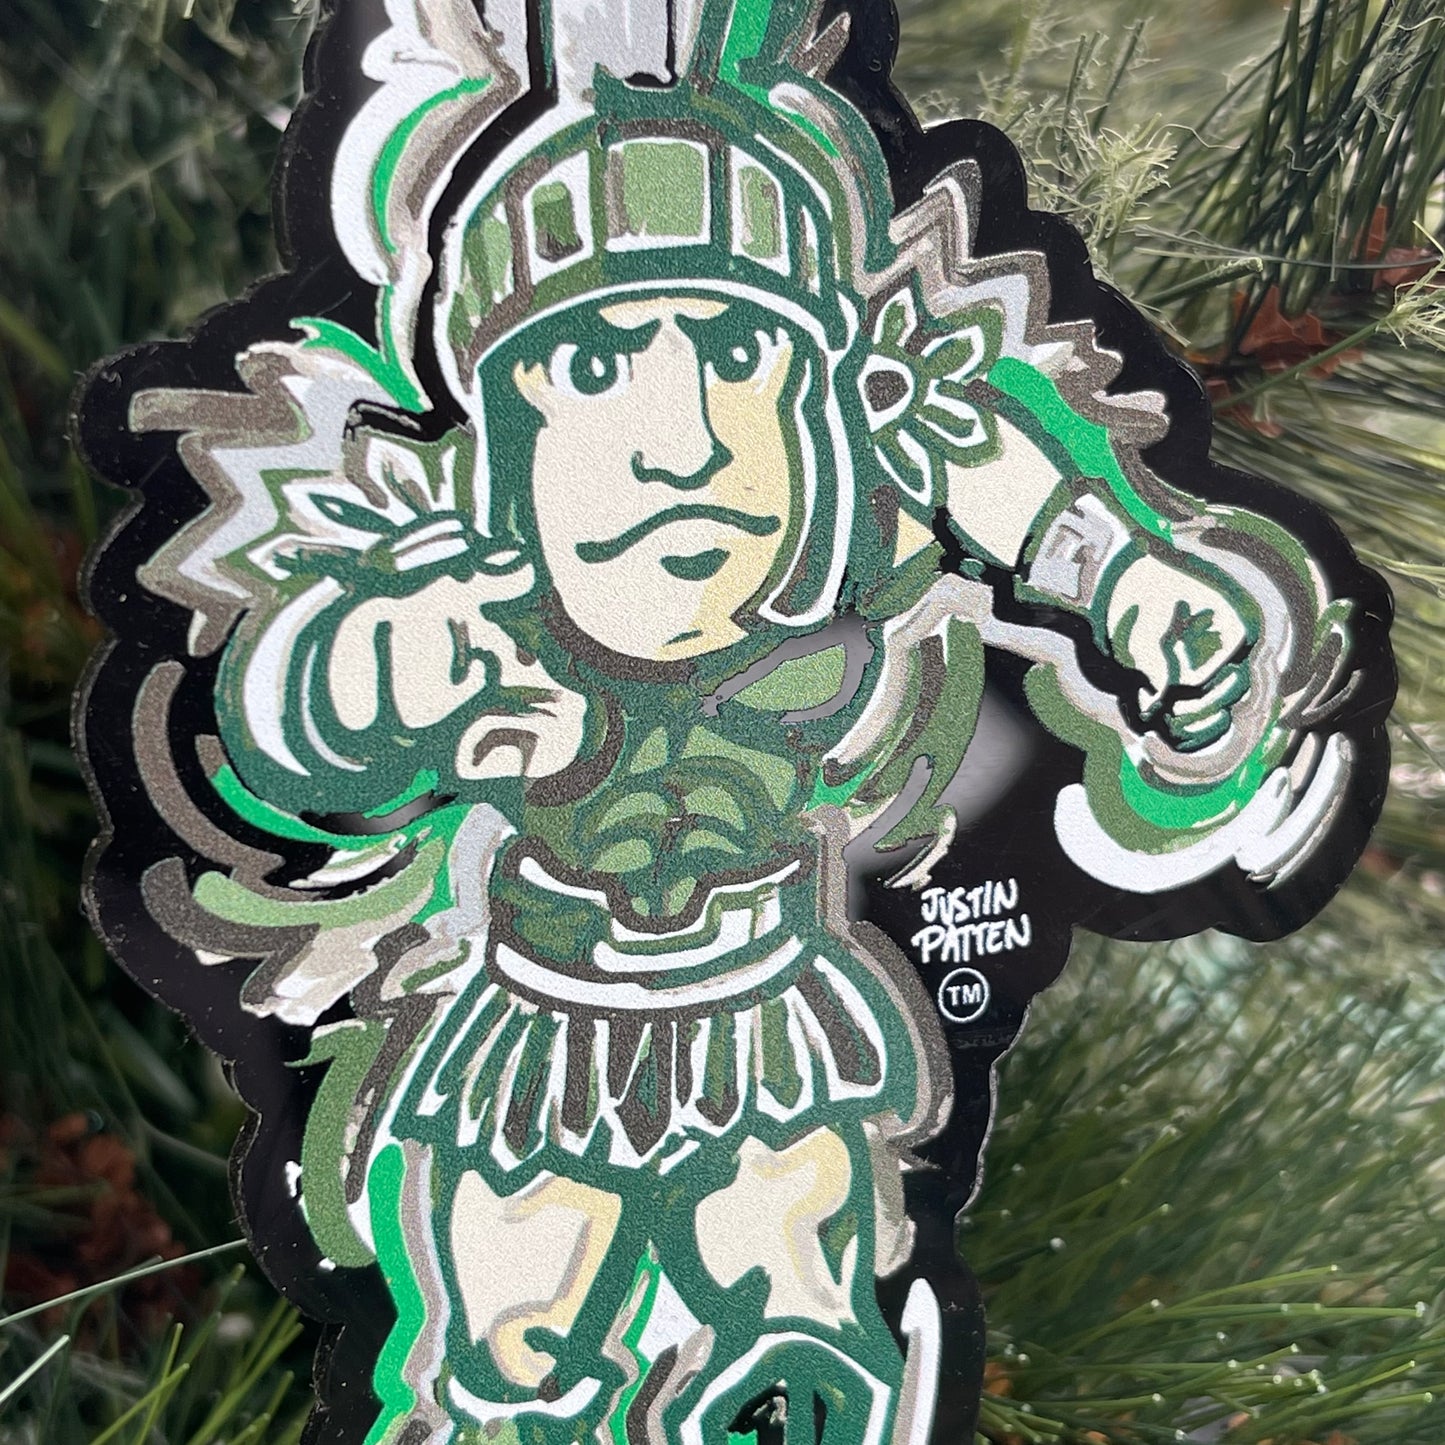 Michigan State University Sparty Ornament by Justin Patten